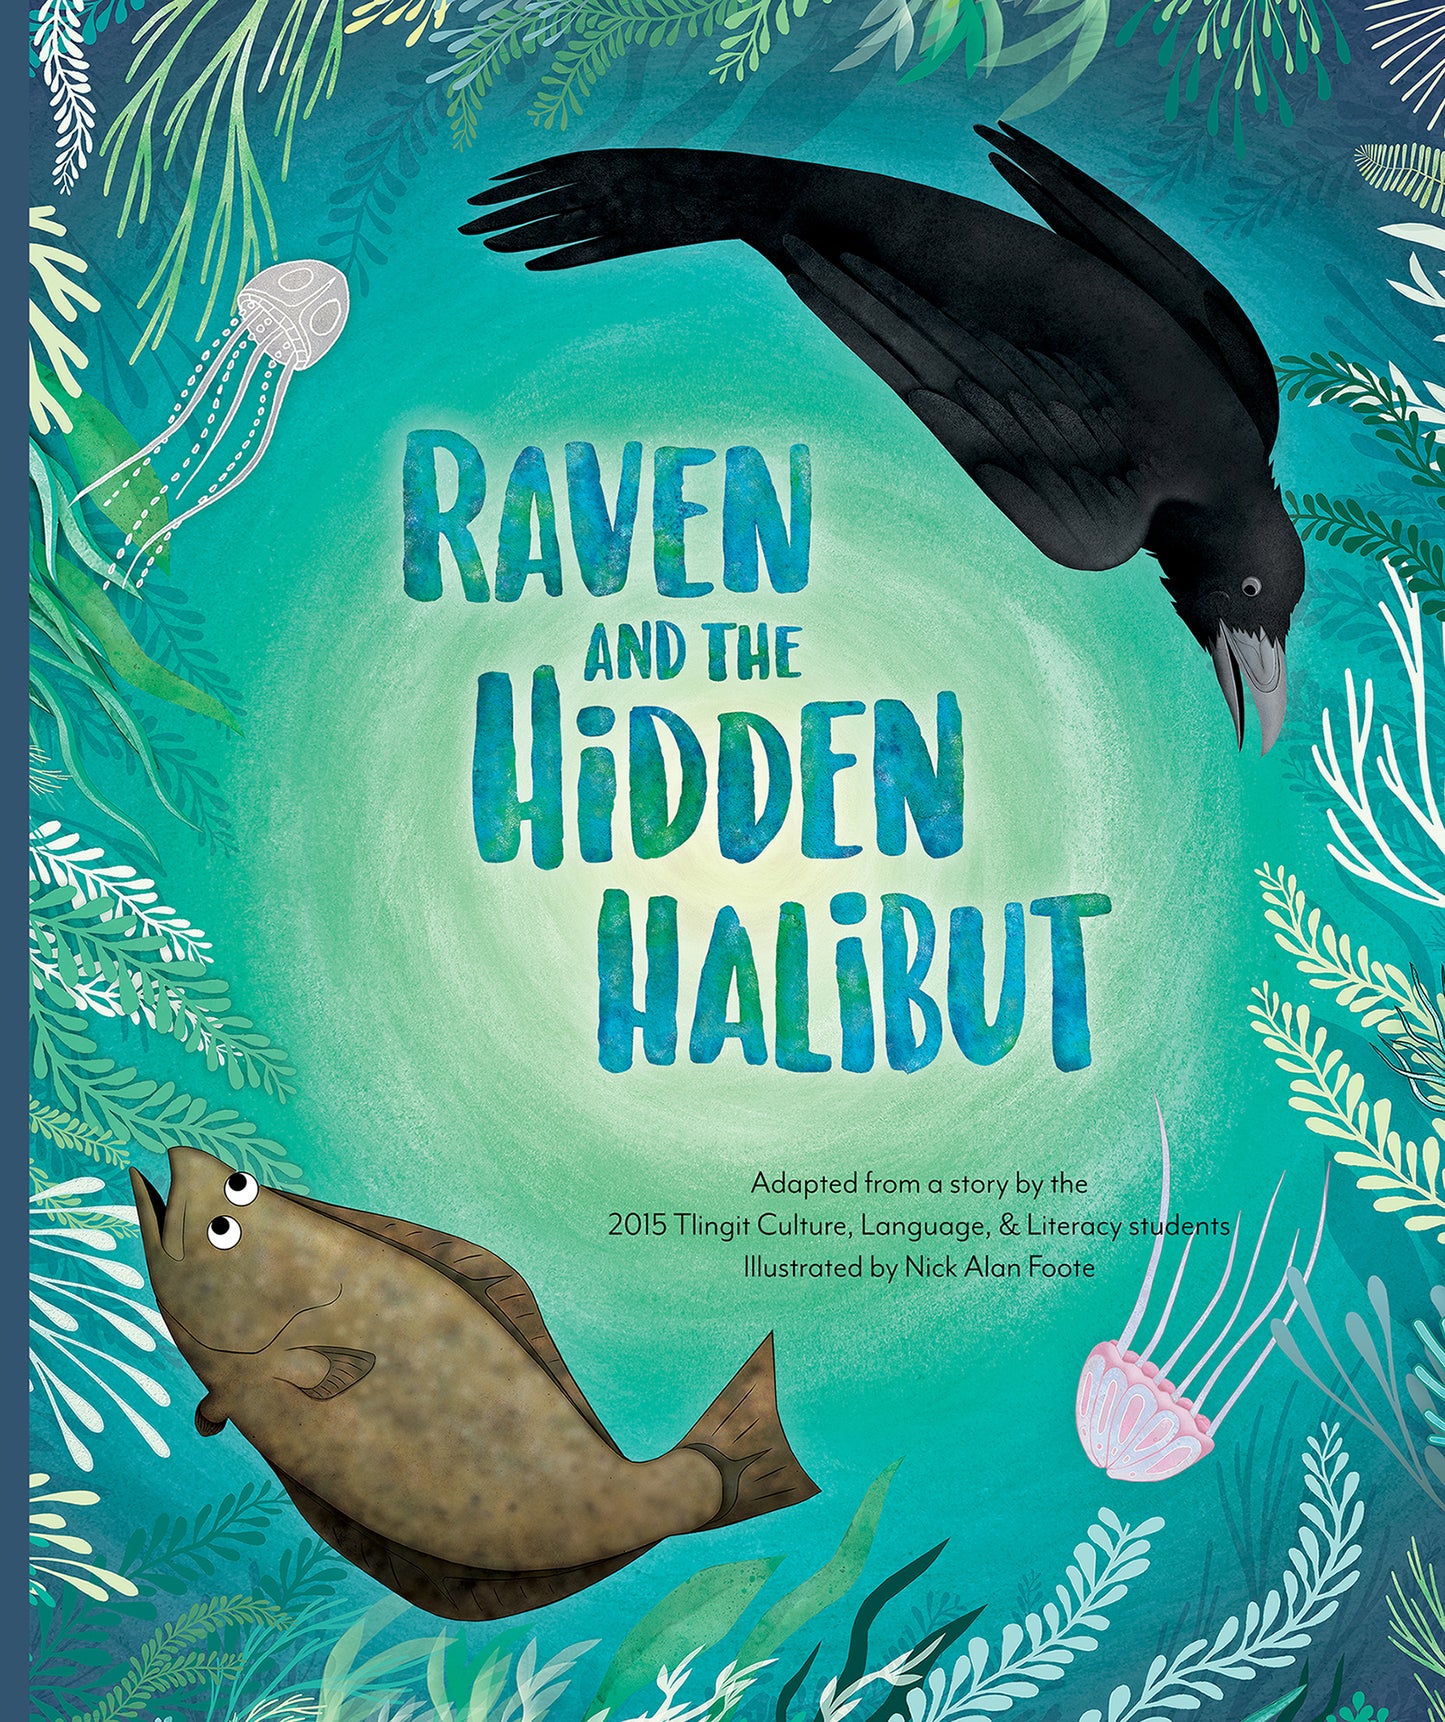 Book, BRR - “Raven and the Hidden Halibut"